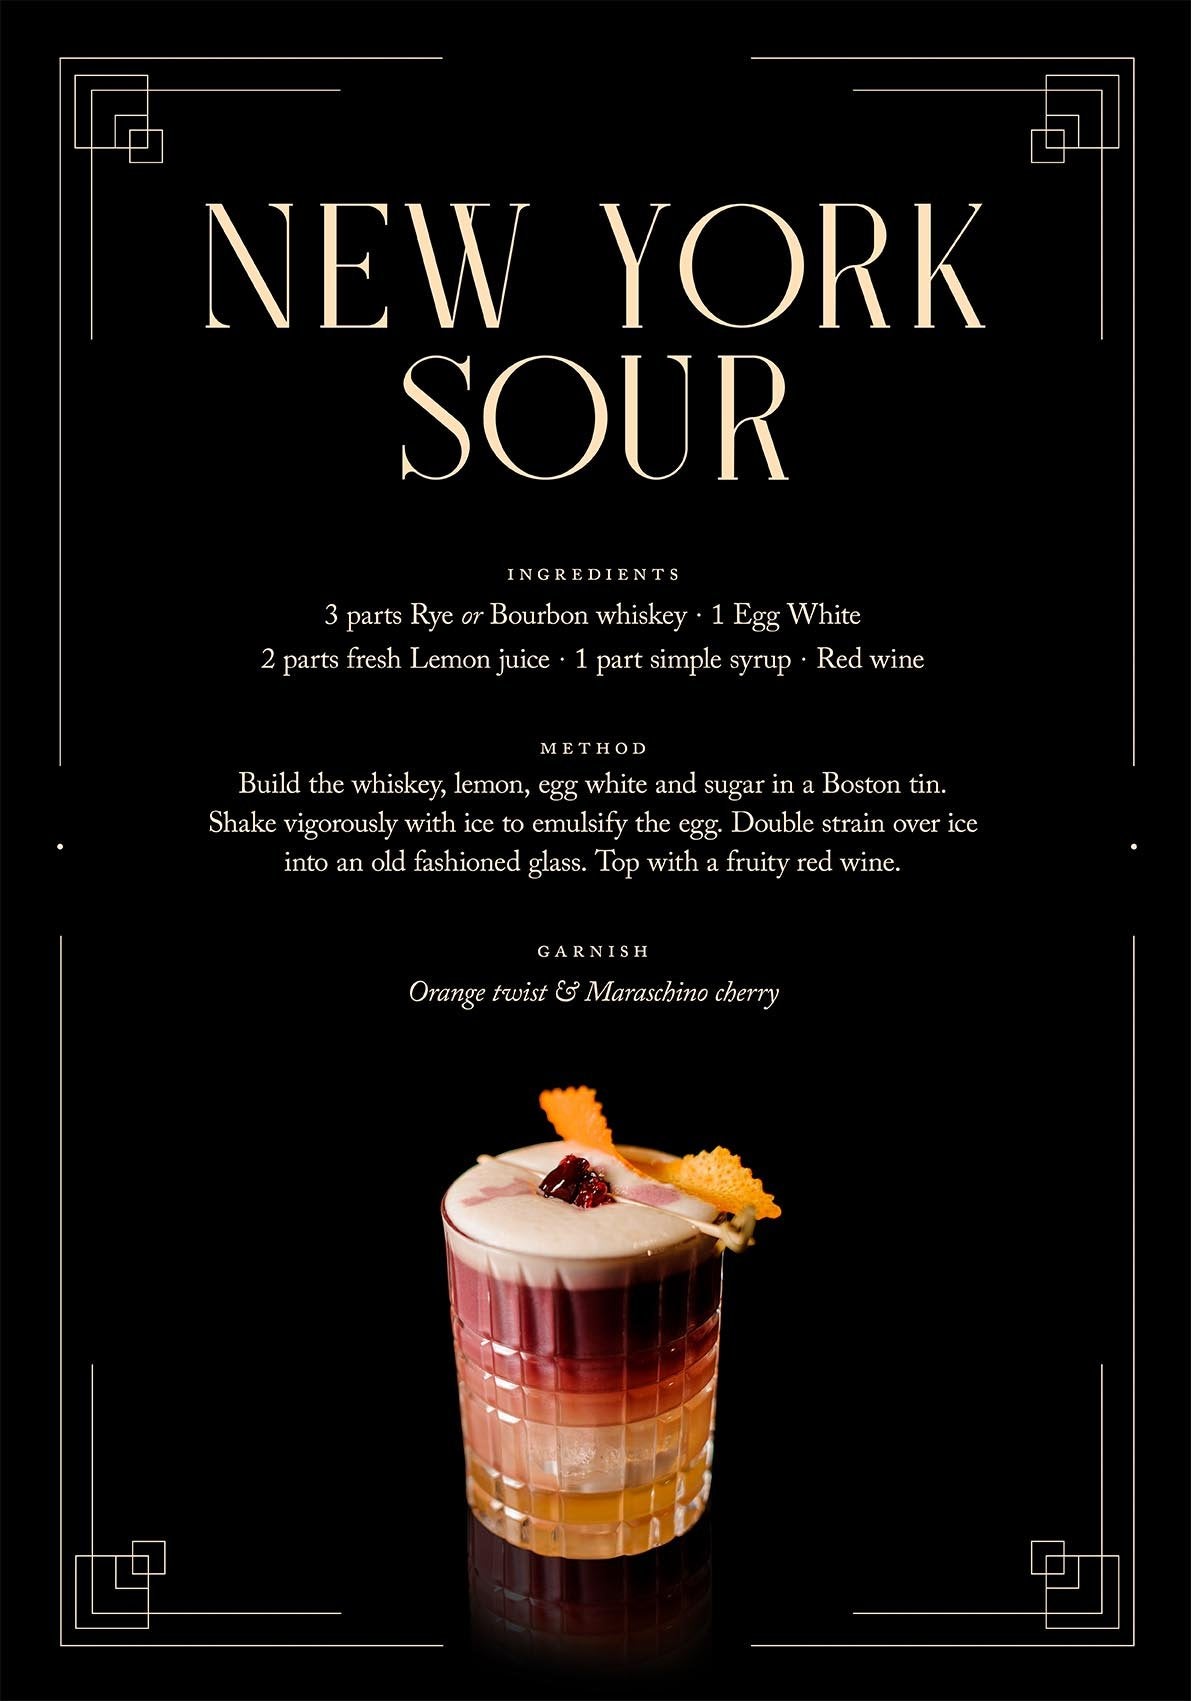 New York Sour Cocktail Recipe Poster